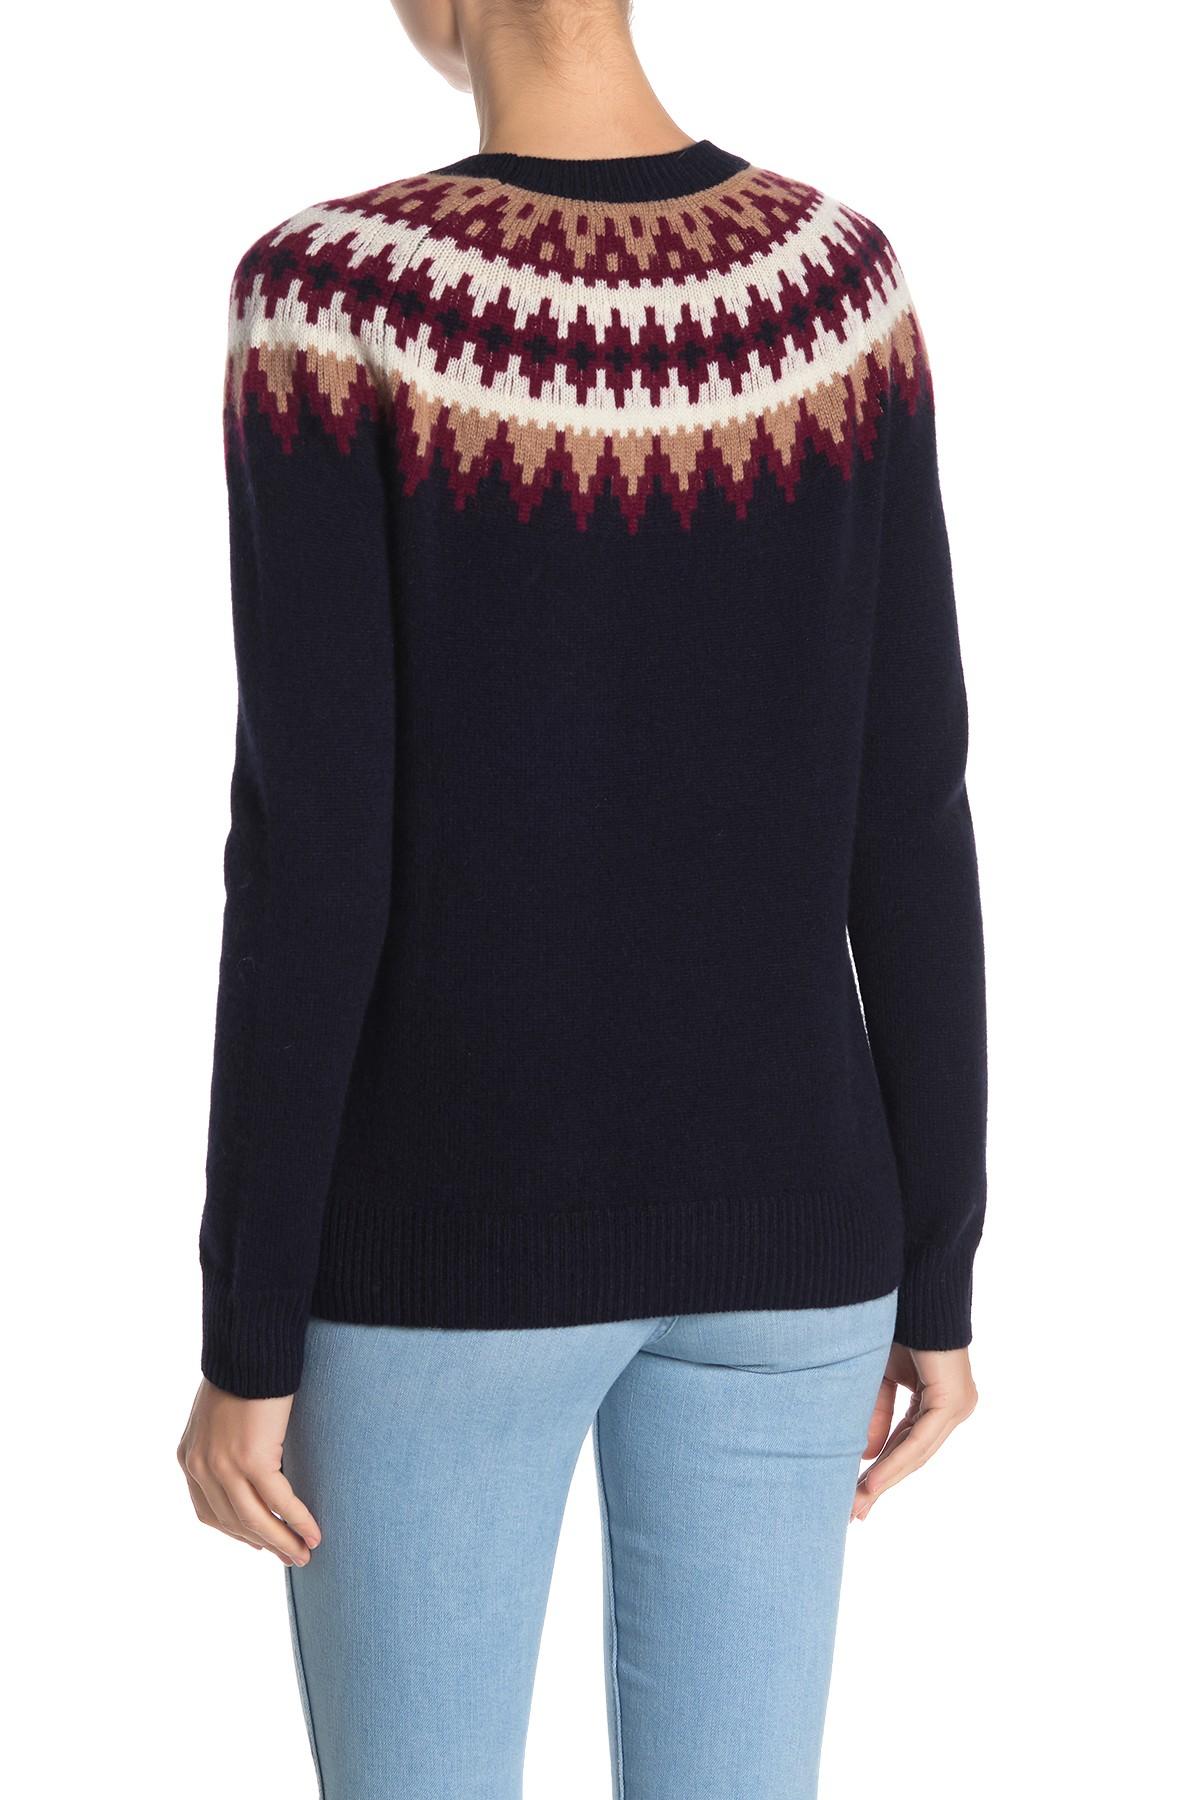 Sofia Cashmere Fair Isle Cashmere Sweater in Navy Combo (Blue) - Lyst